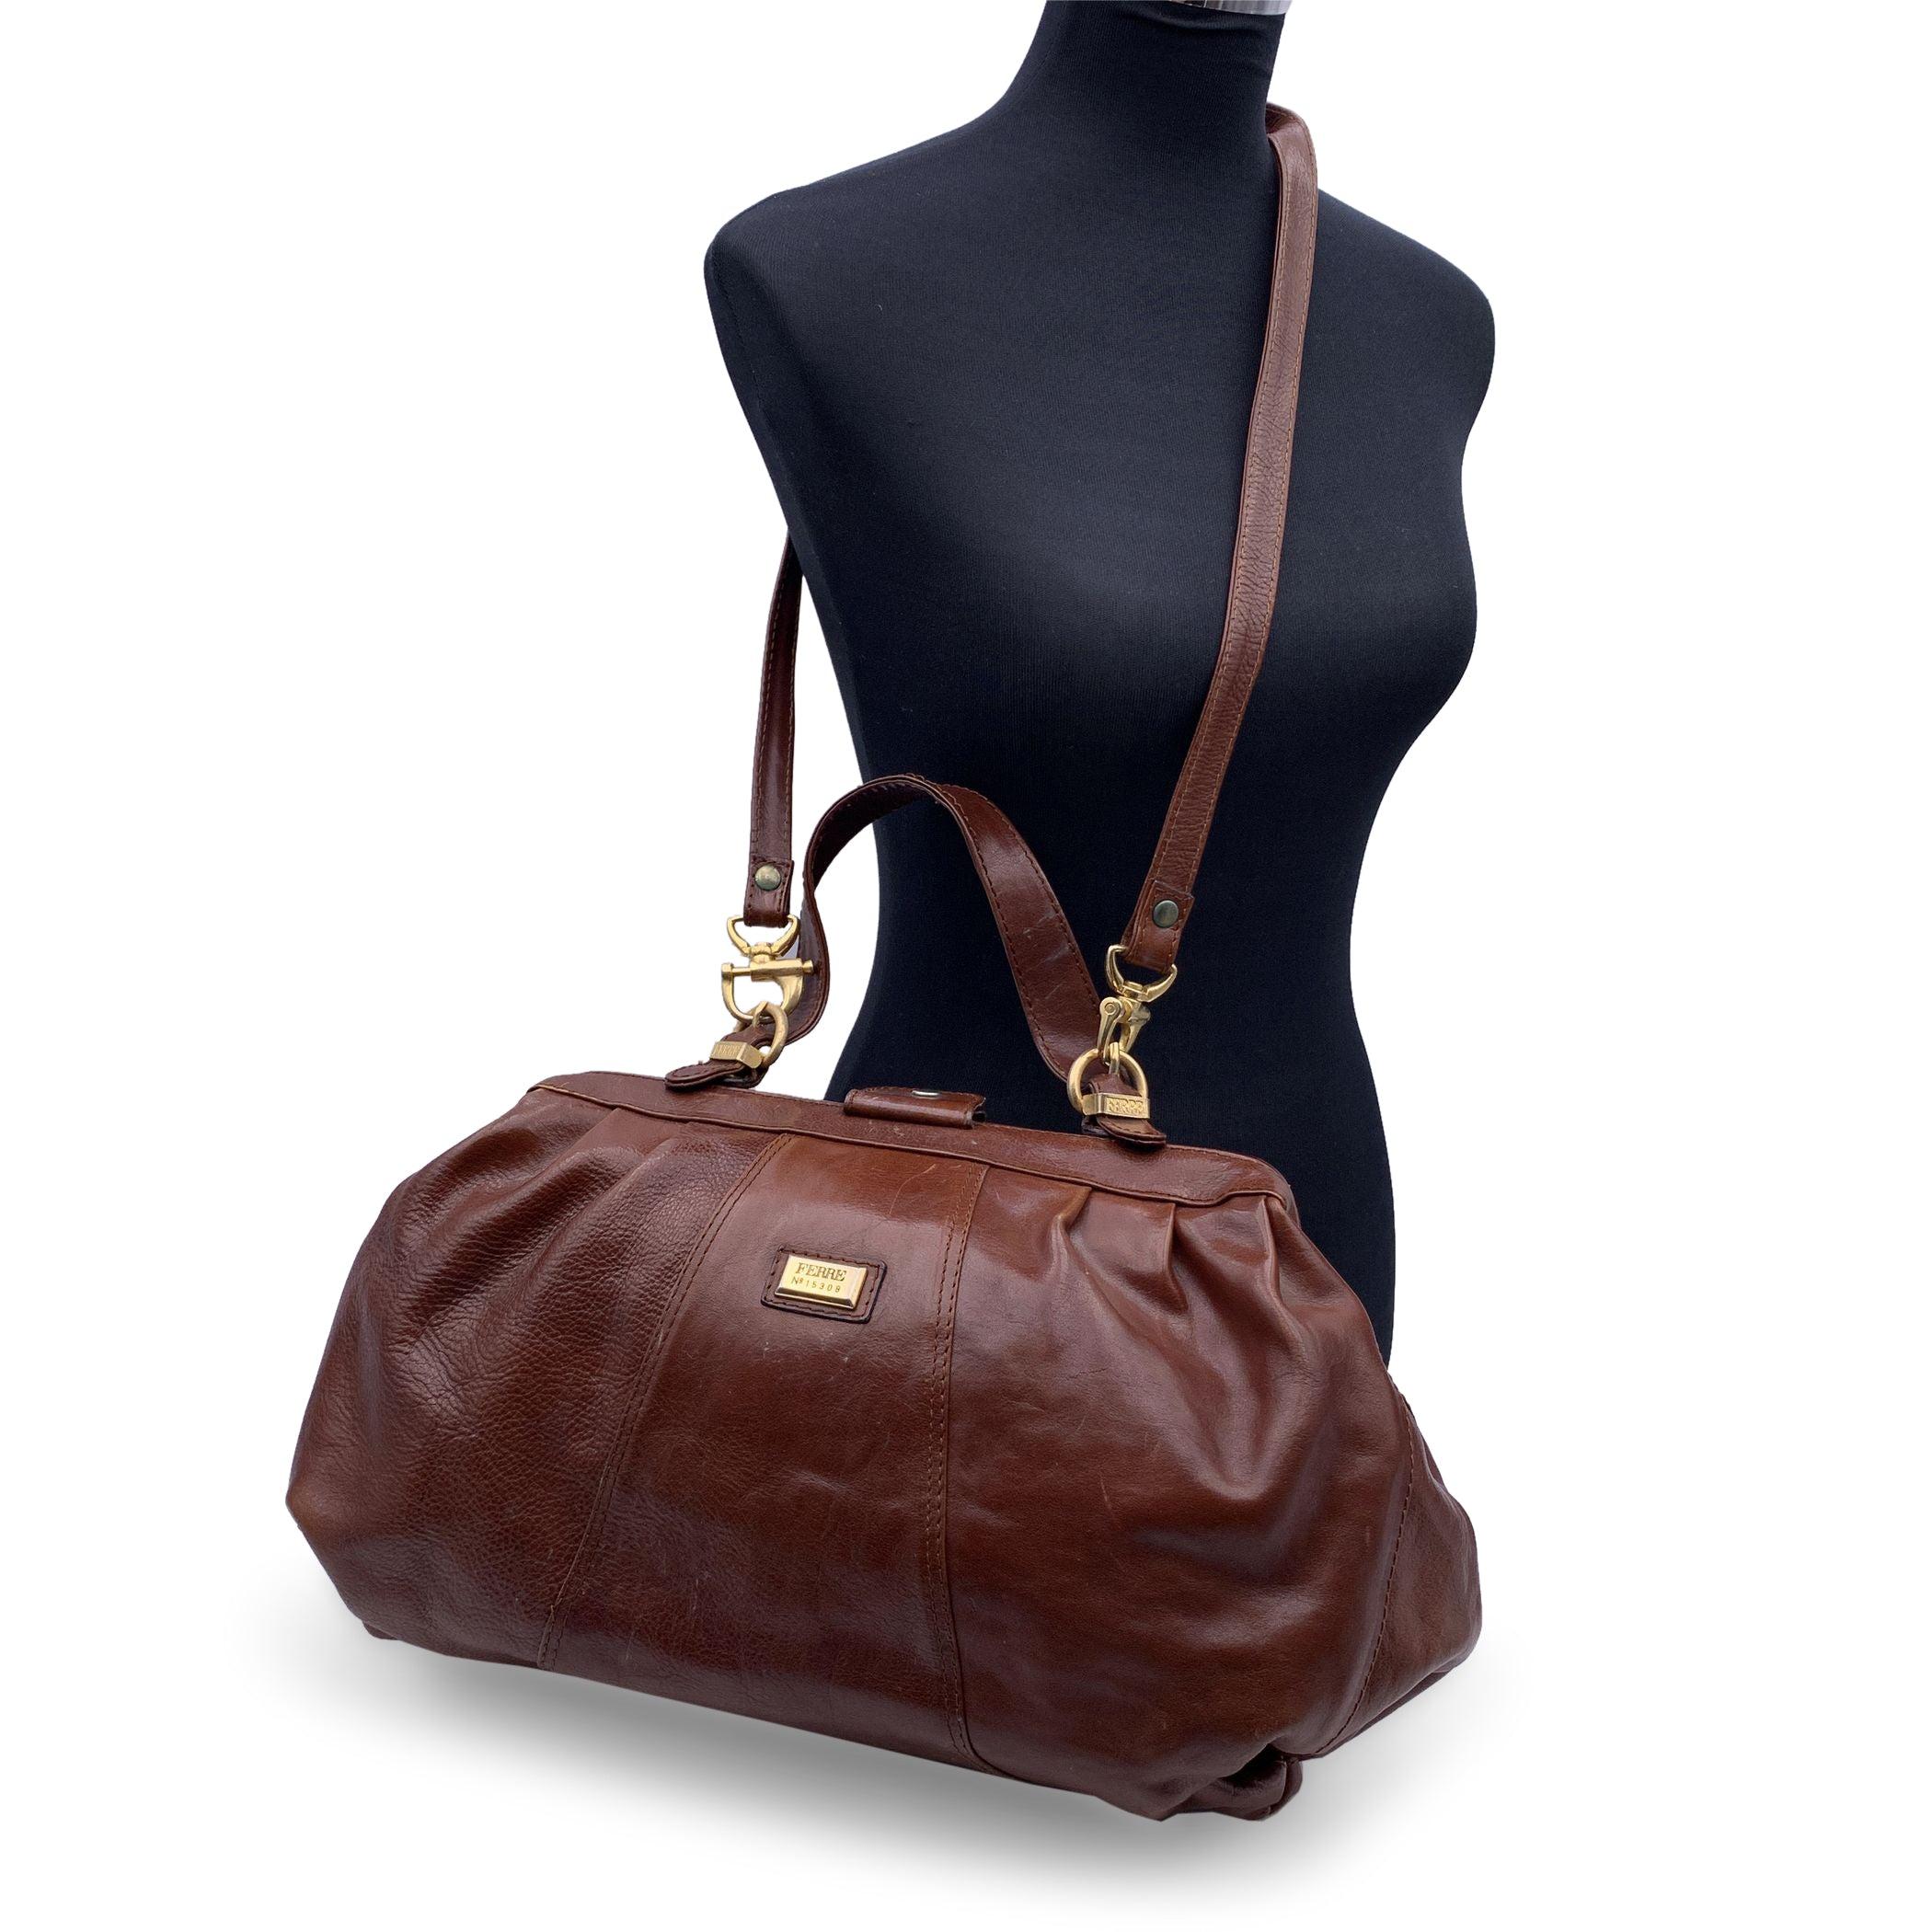 Beautiful Vintage Gianfranco Ferre brown leather doctor bag. Brown leather and gold metal hardware. Top carry handle and removable shoulder strap. Framed top with button closure. Satin signature lining. 1 side zip pocket inside. Giangraco Ferre tag